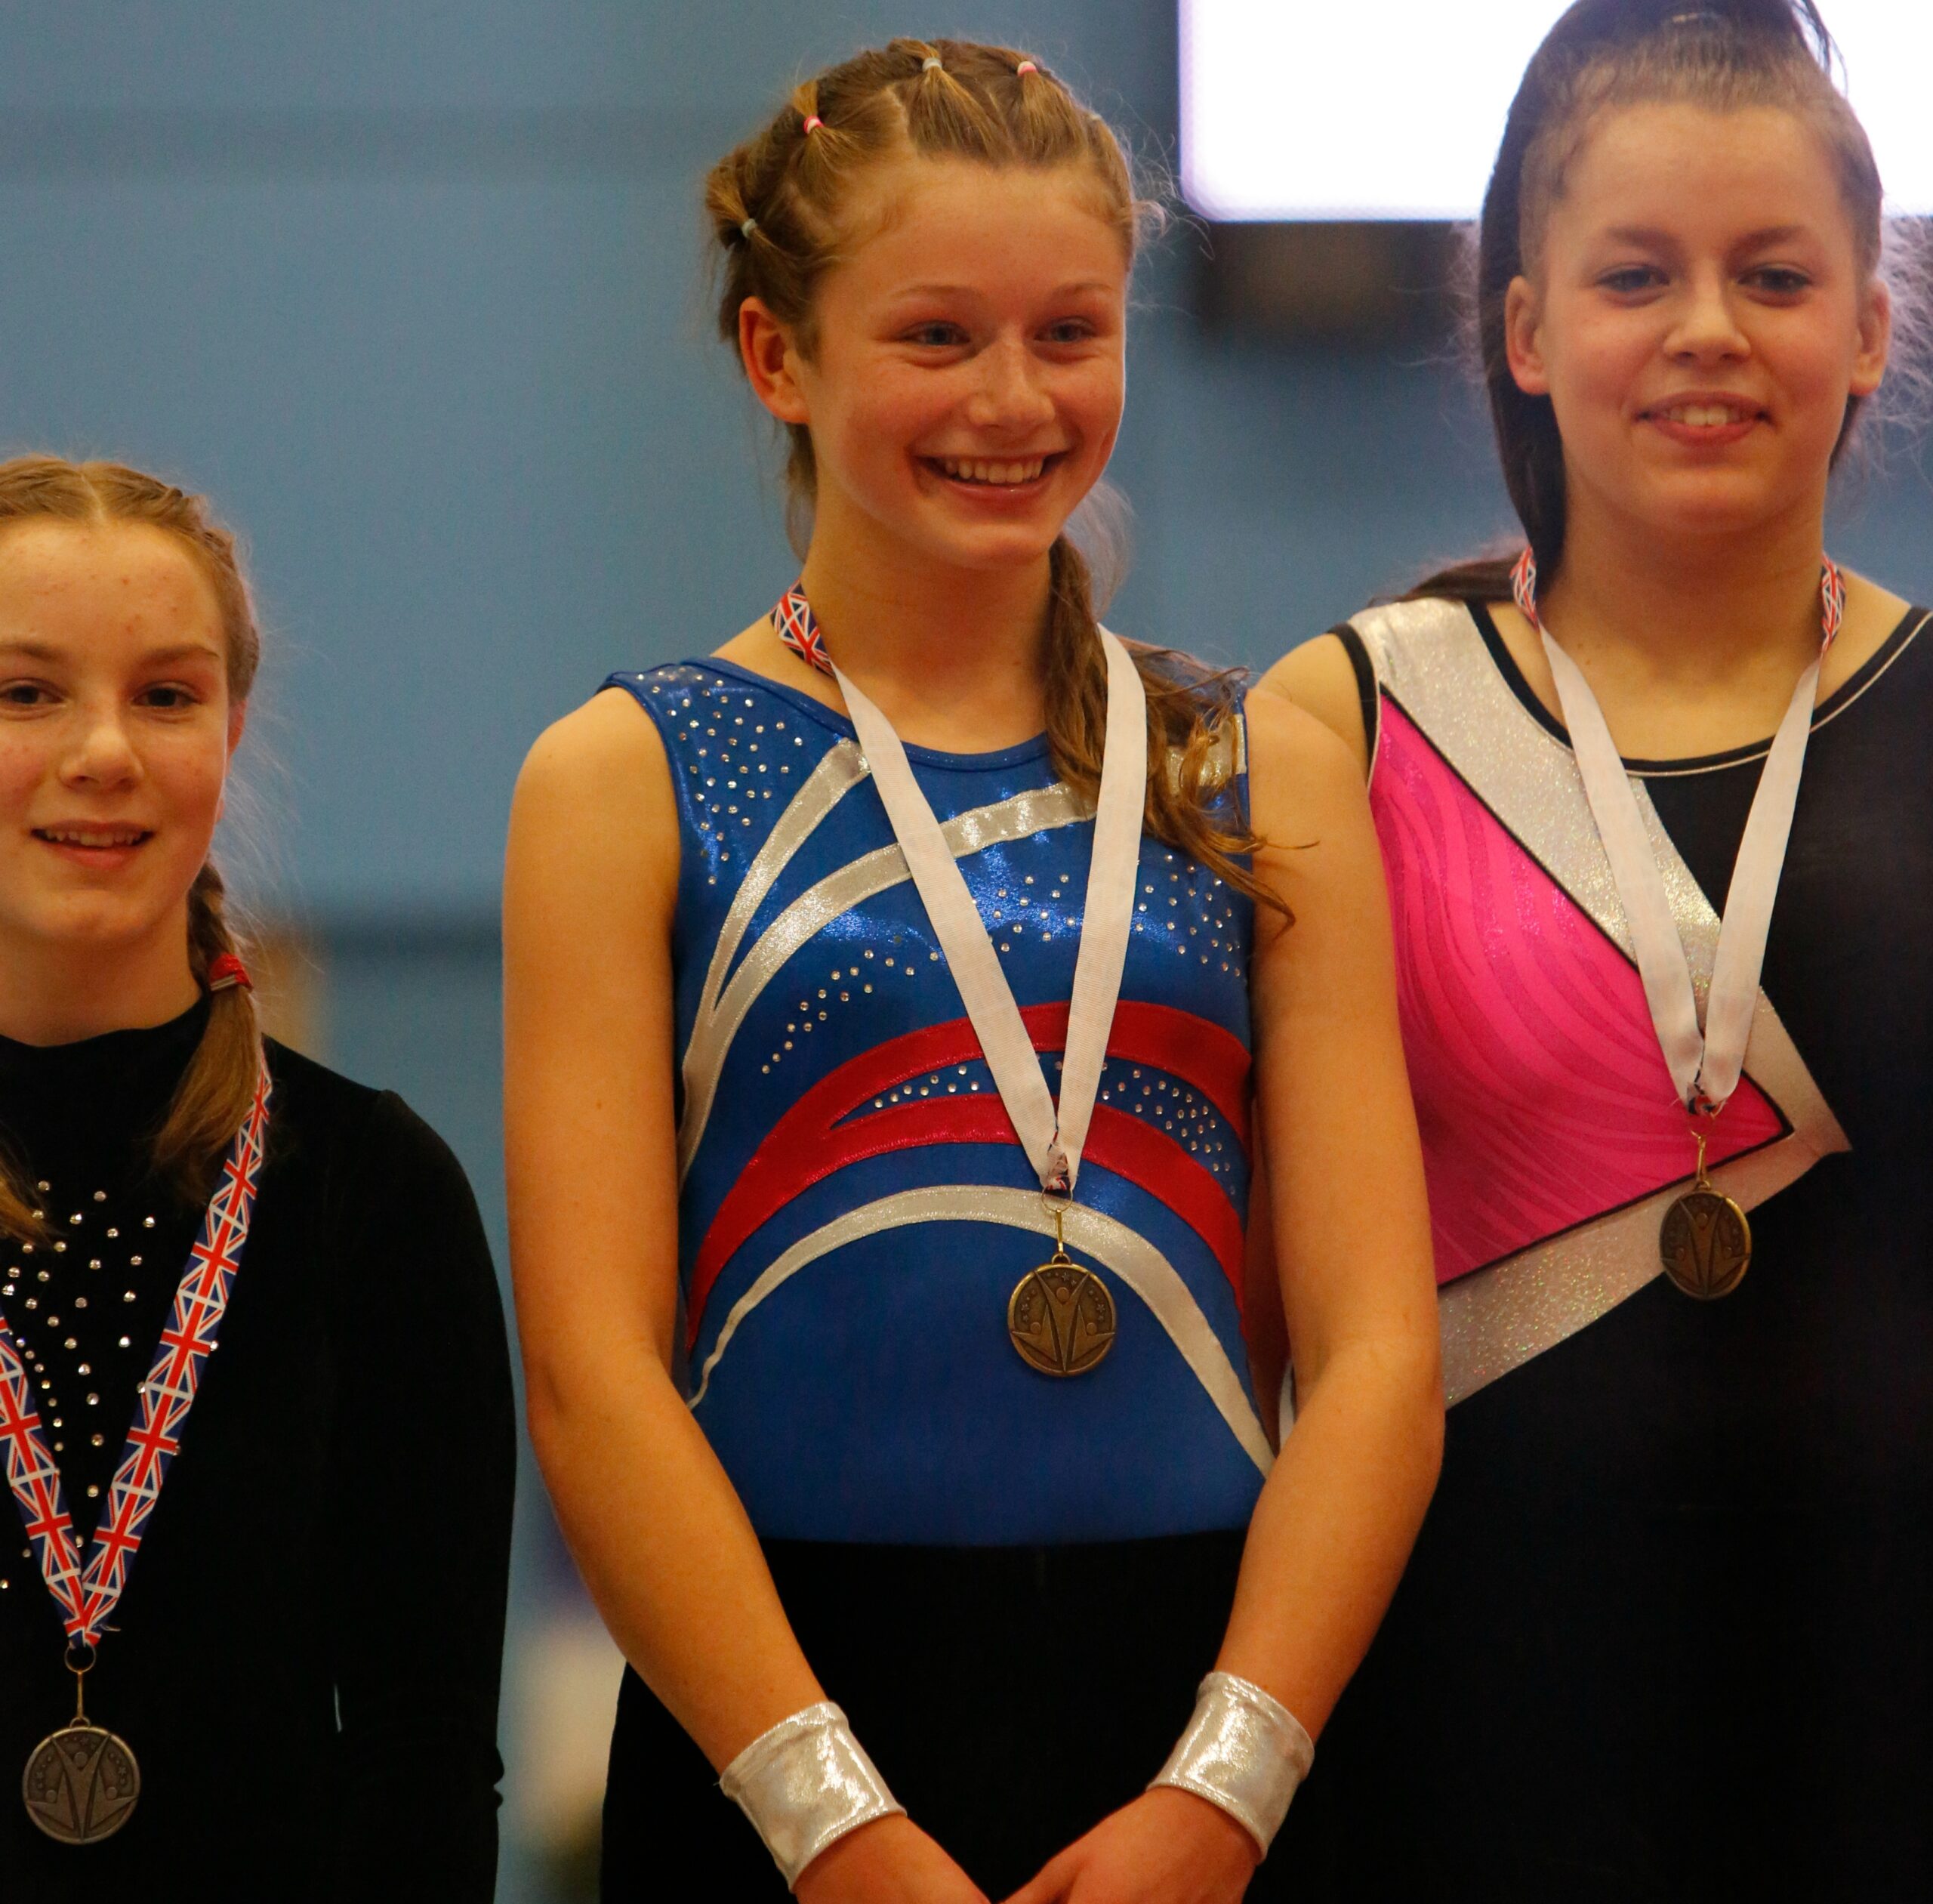 Are gymnastics competitions healthy for children